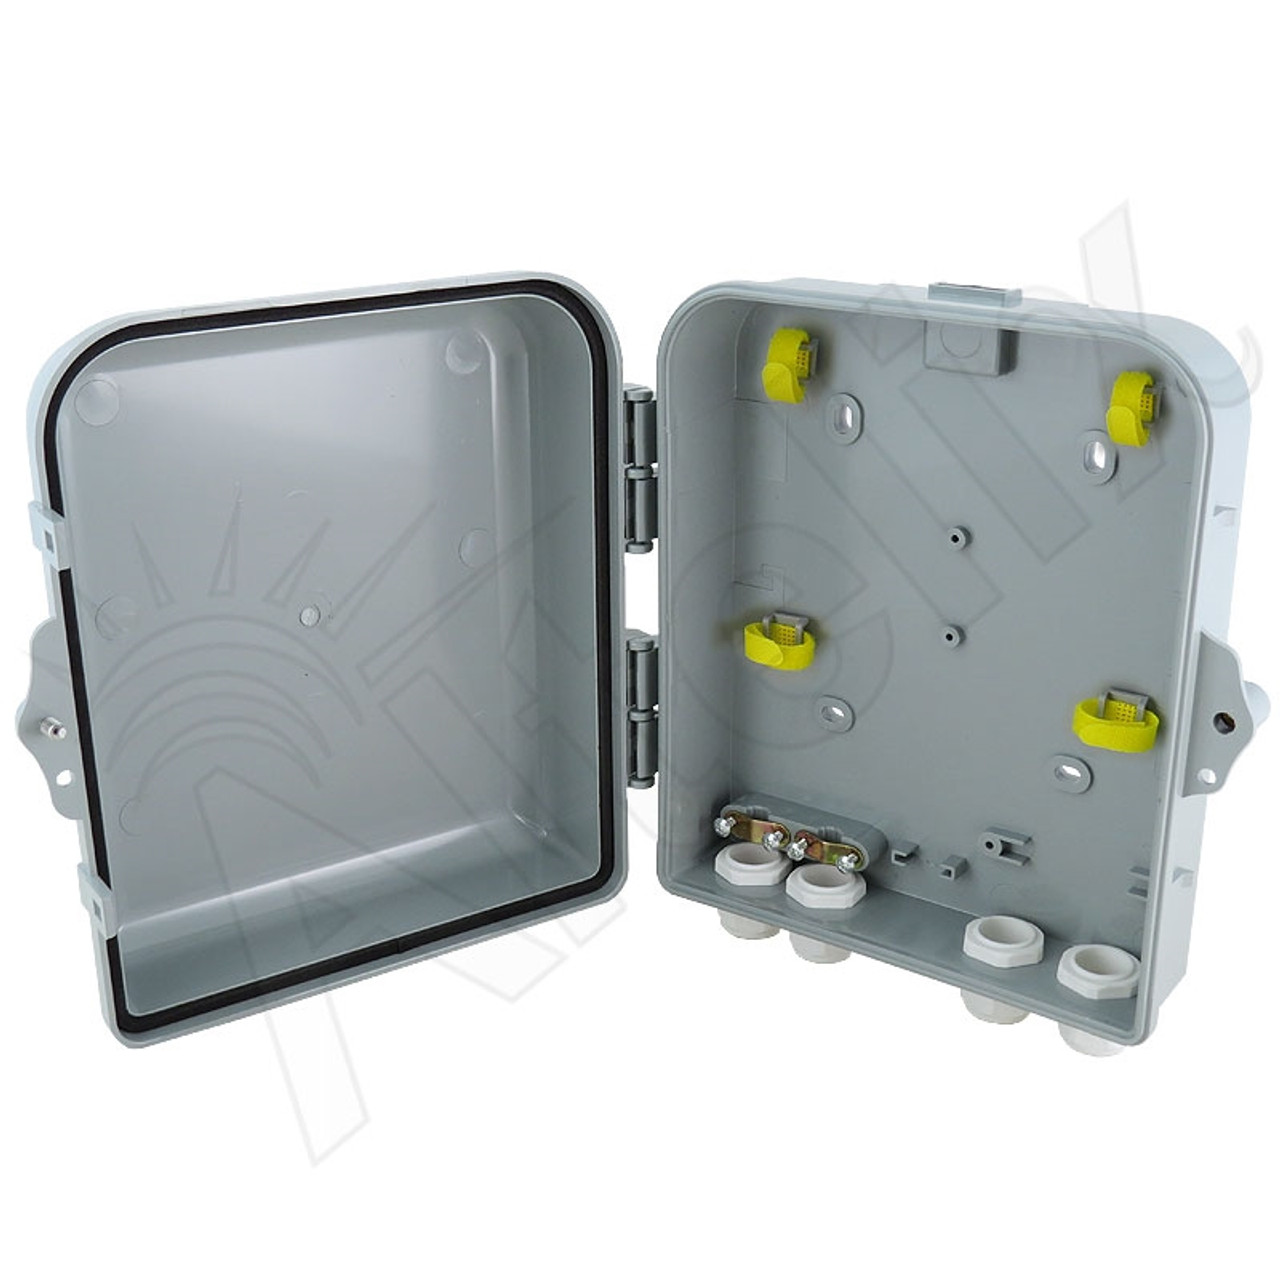 Altelix 9x8x3 PC+ABS Weatherproof Vented Utility Box NEMA Enclosure with  Hinged Door and Aluminum Mounting Plate